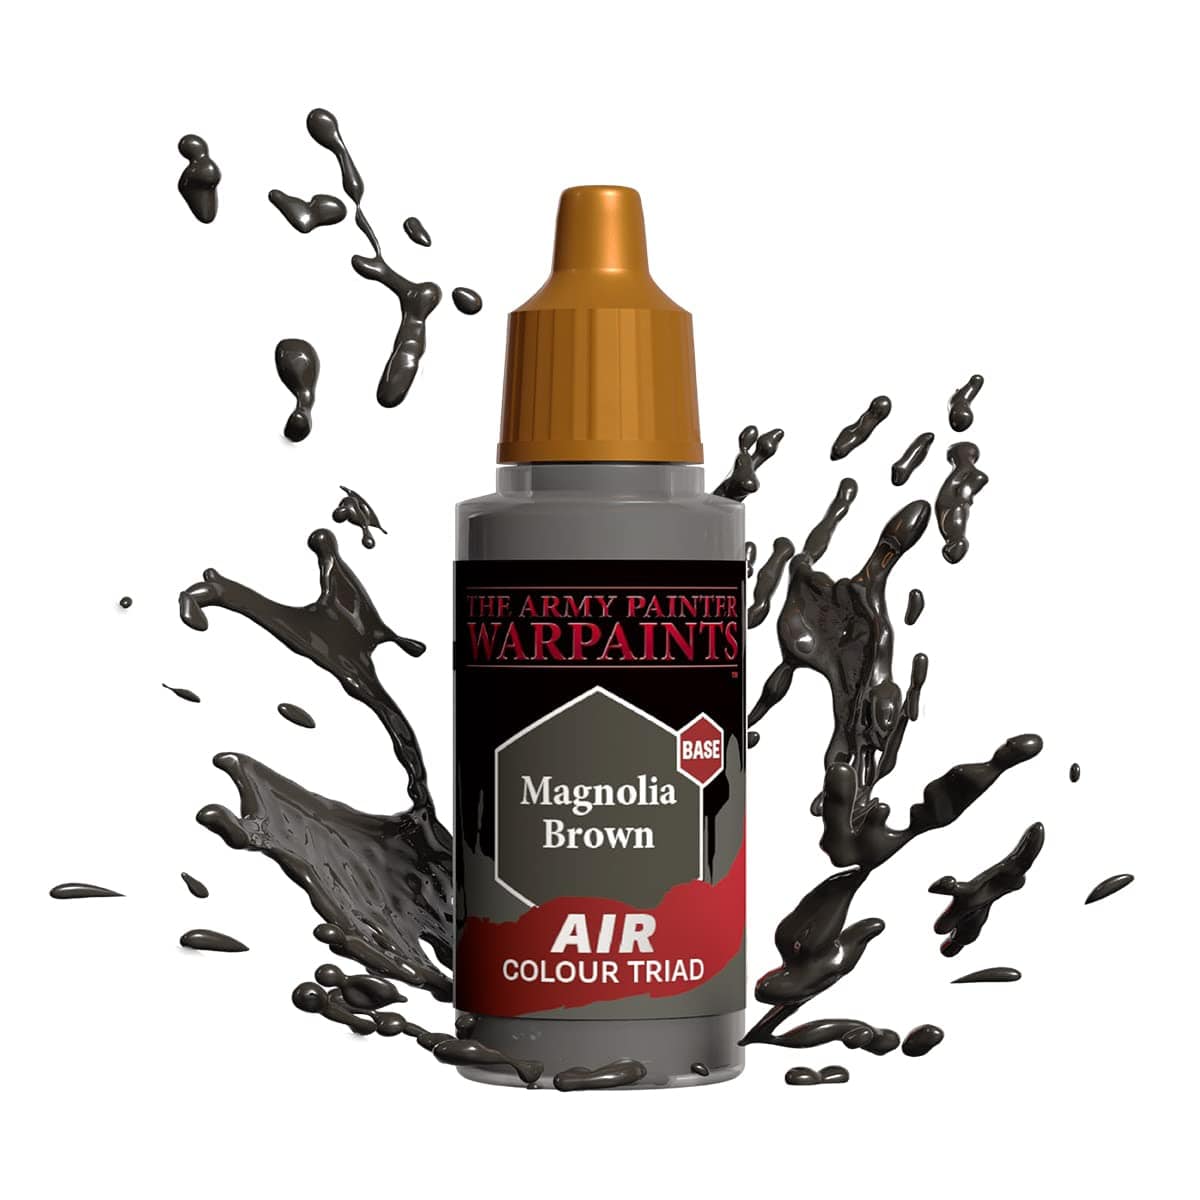 The Army Painter Warpaints Air: Magnolia Brown 18ml - Lost City Toys